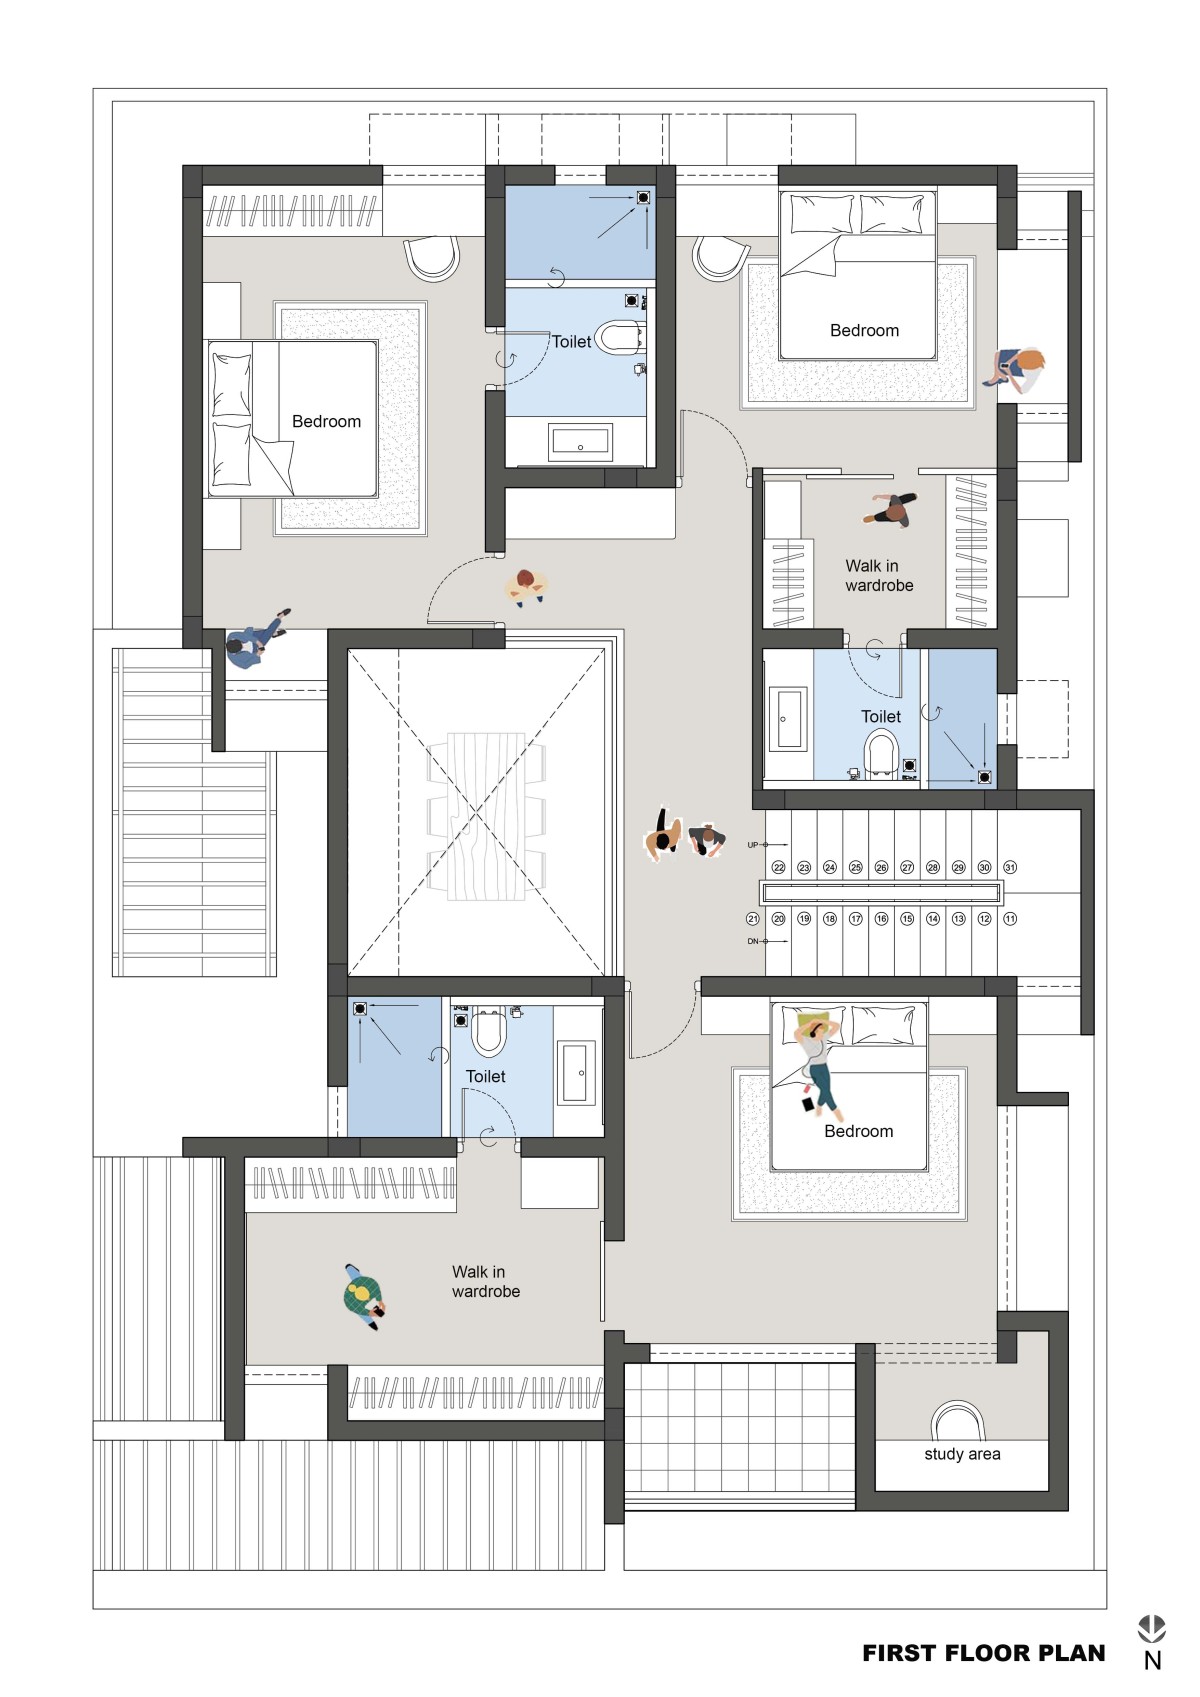 First floor plan of Falak Residence by Space